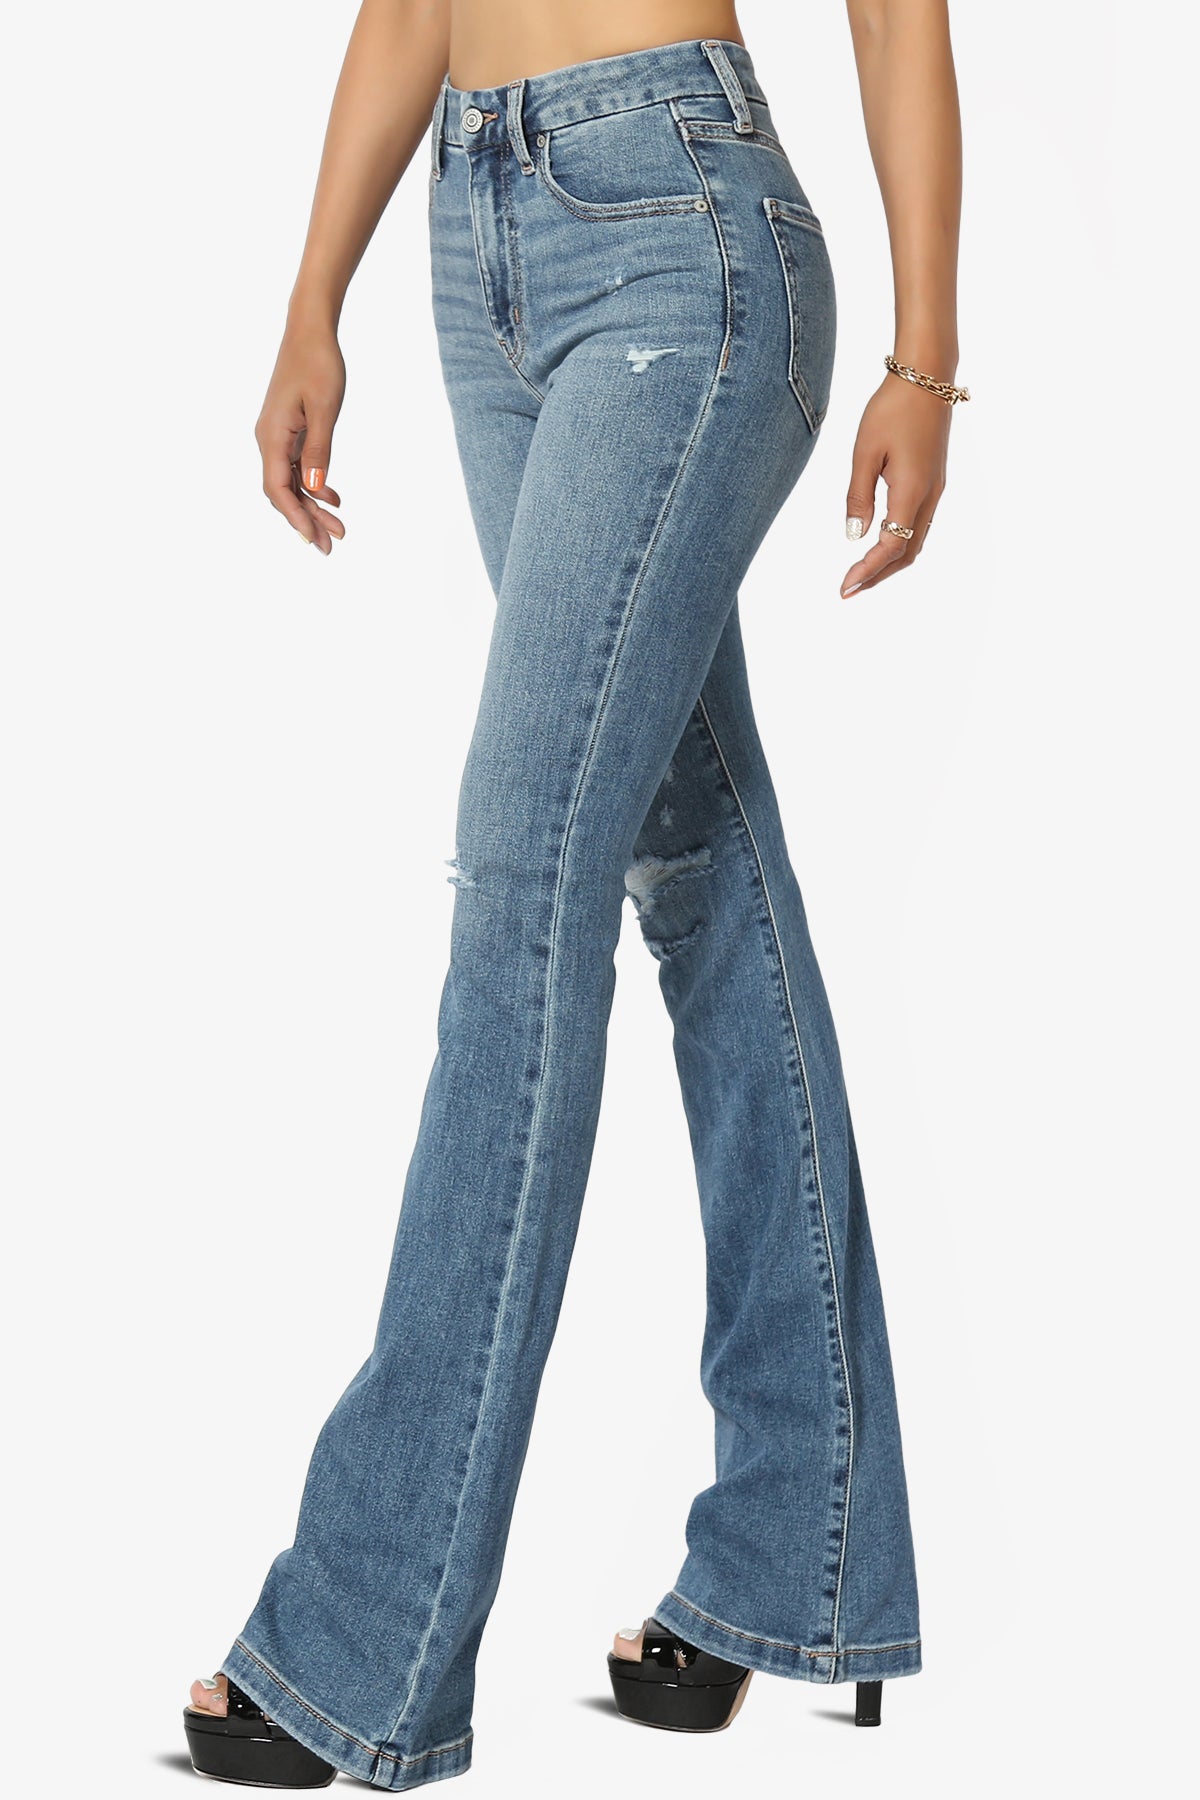 Load image into Gallery viewer, Aliyah Super High Rise Flare Jeans in LIVLY MEDIUM_1
